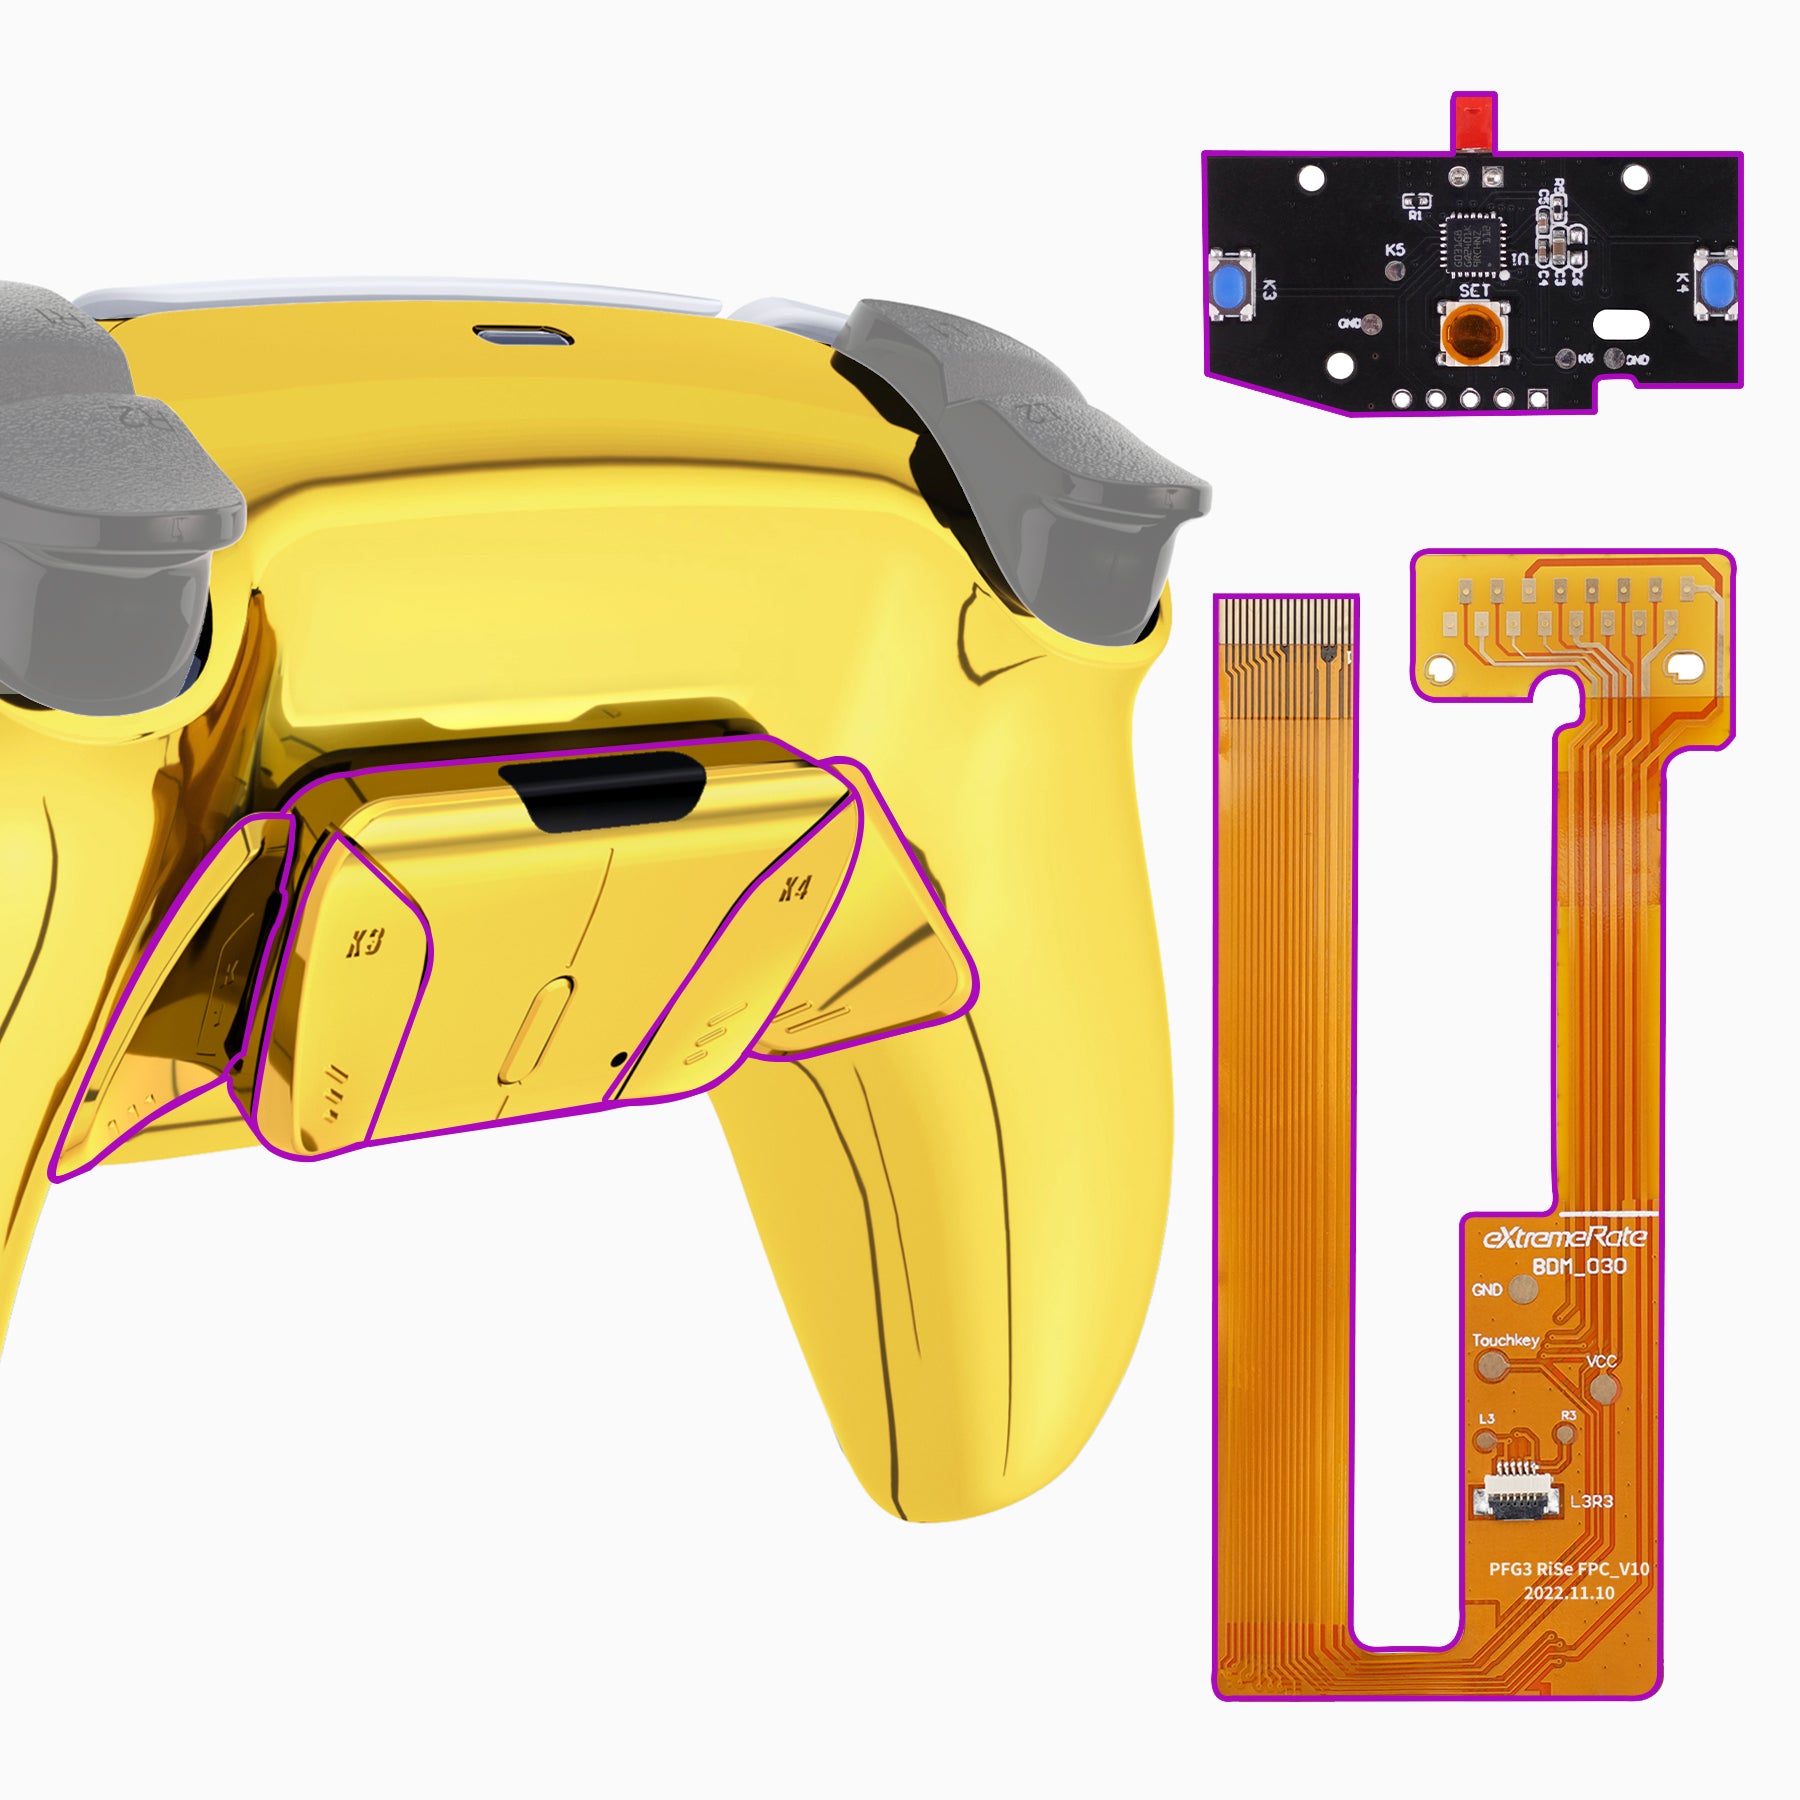 Gold PS5 Controller!!!, EXTREMERATE